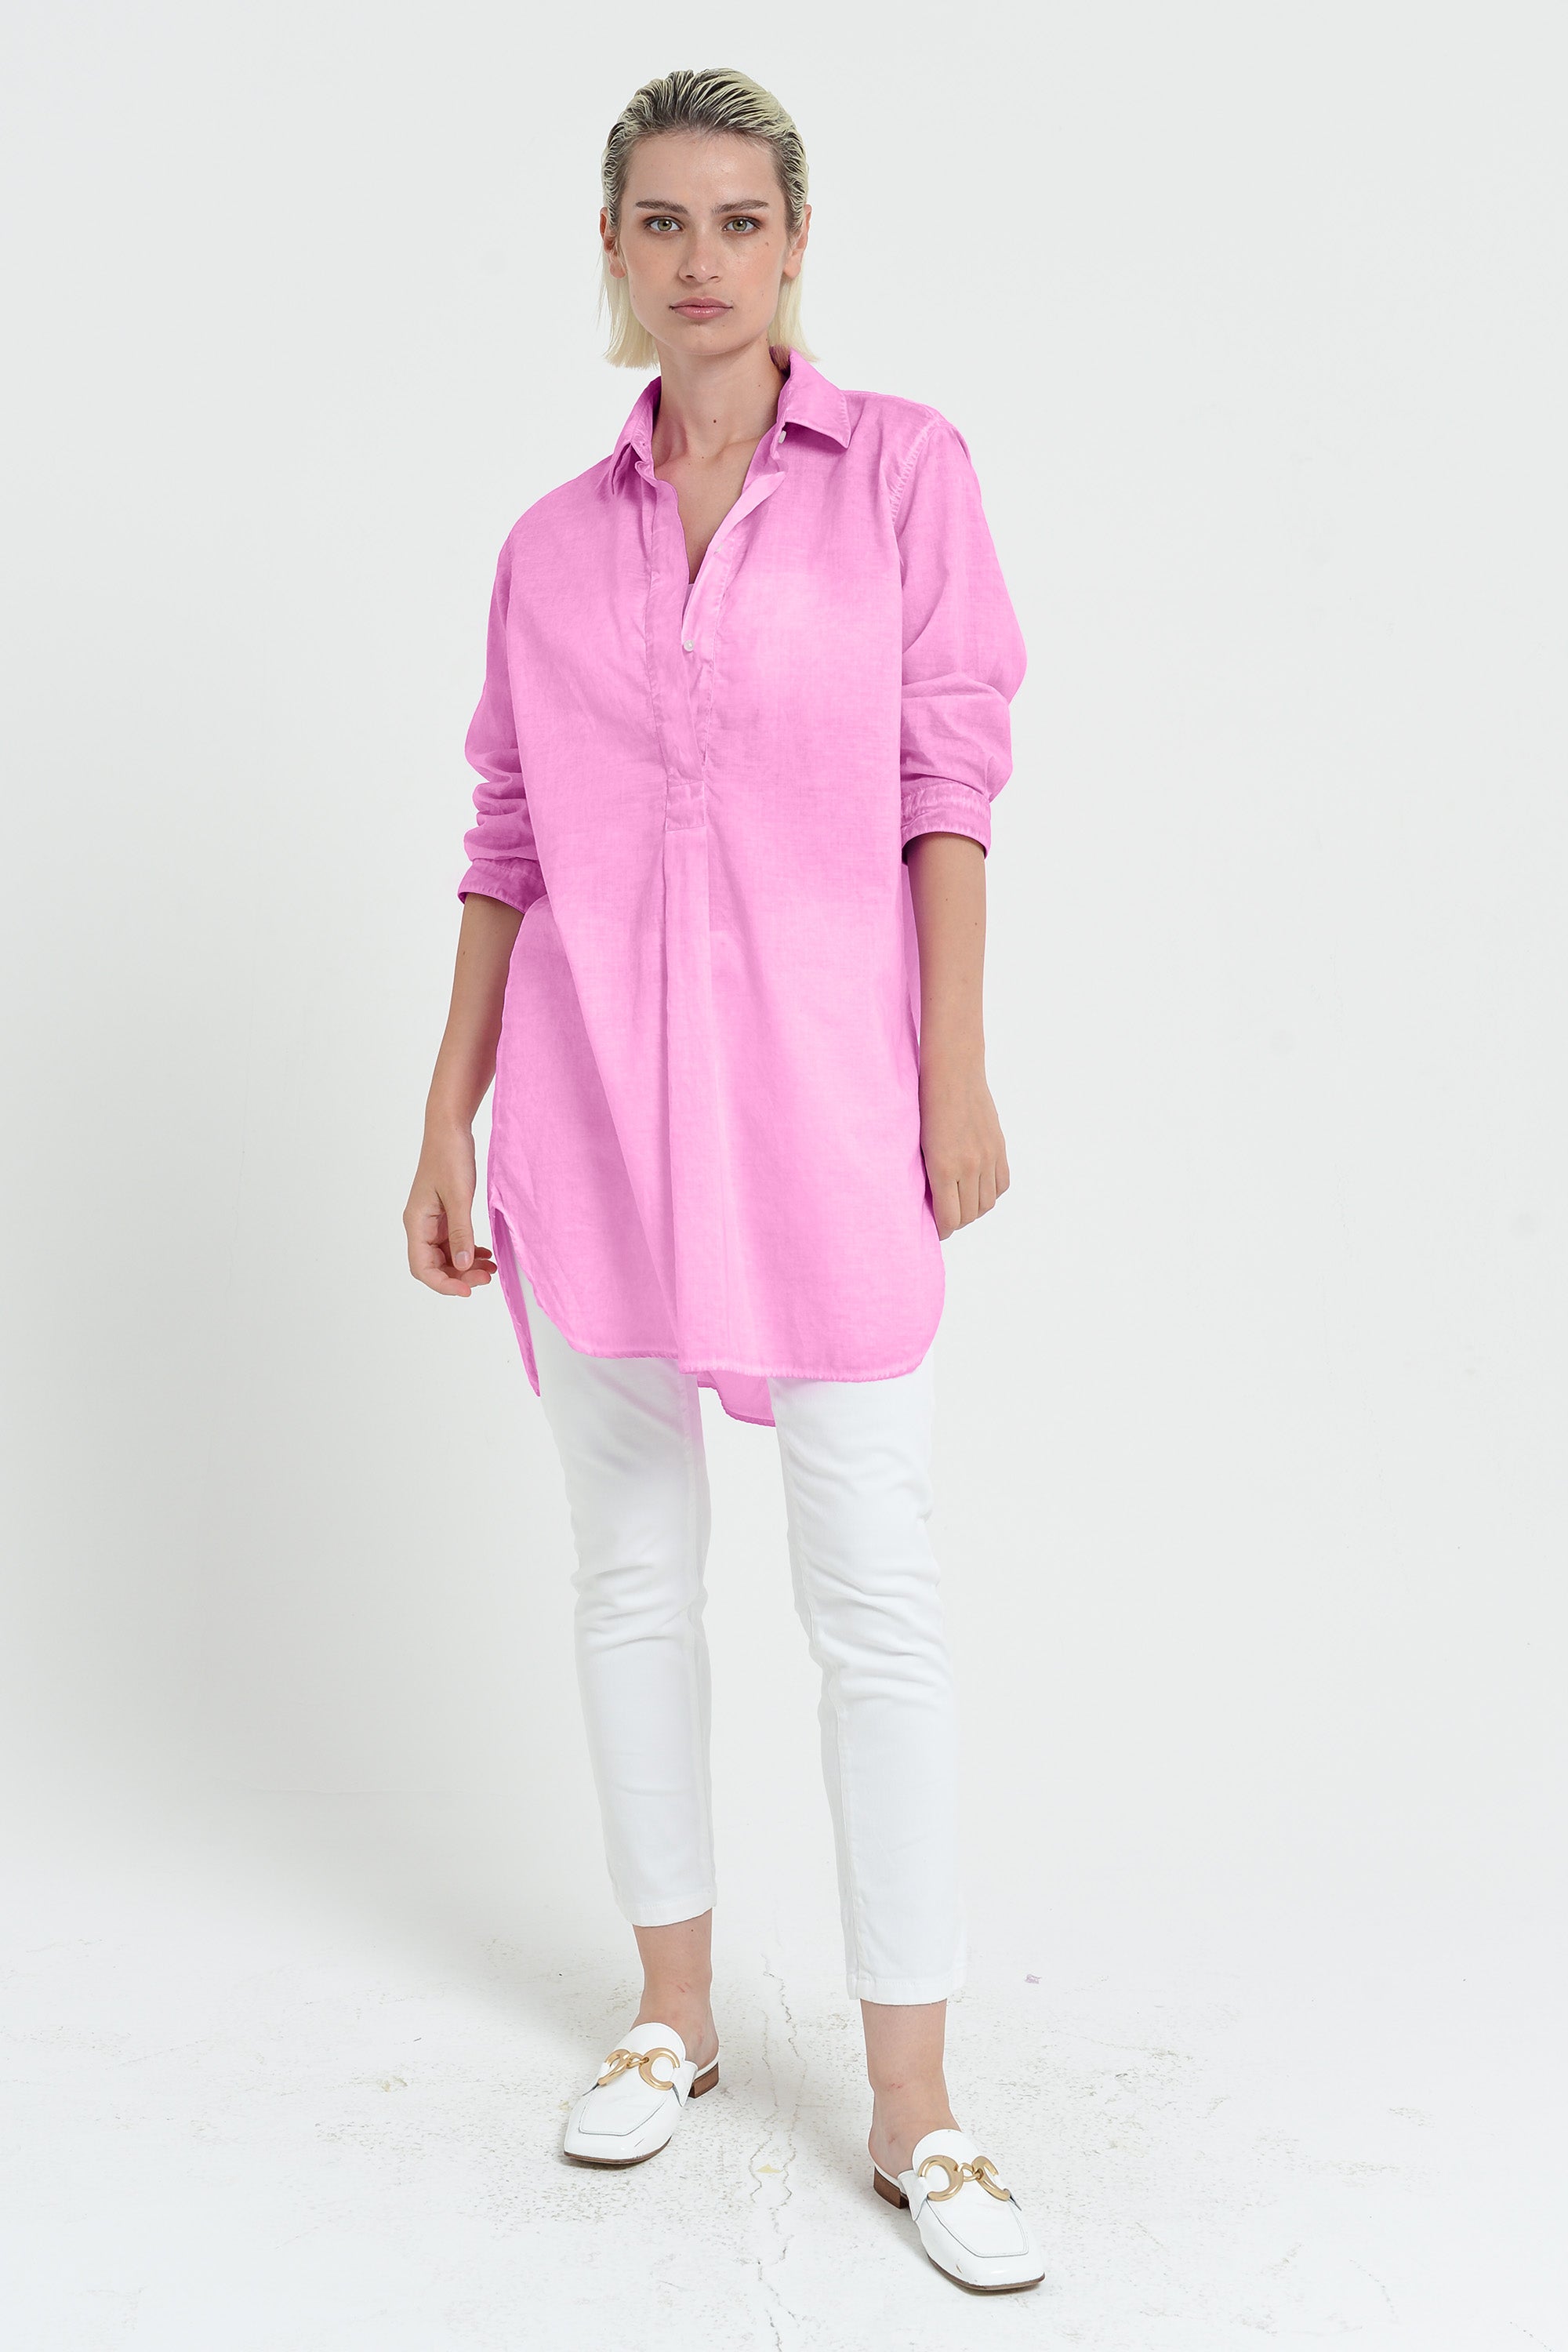 Women's Mini Shirtdress in Cotton Voile - Candy